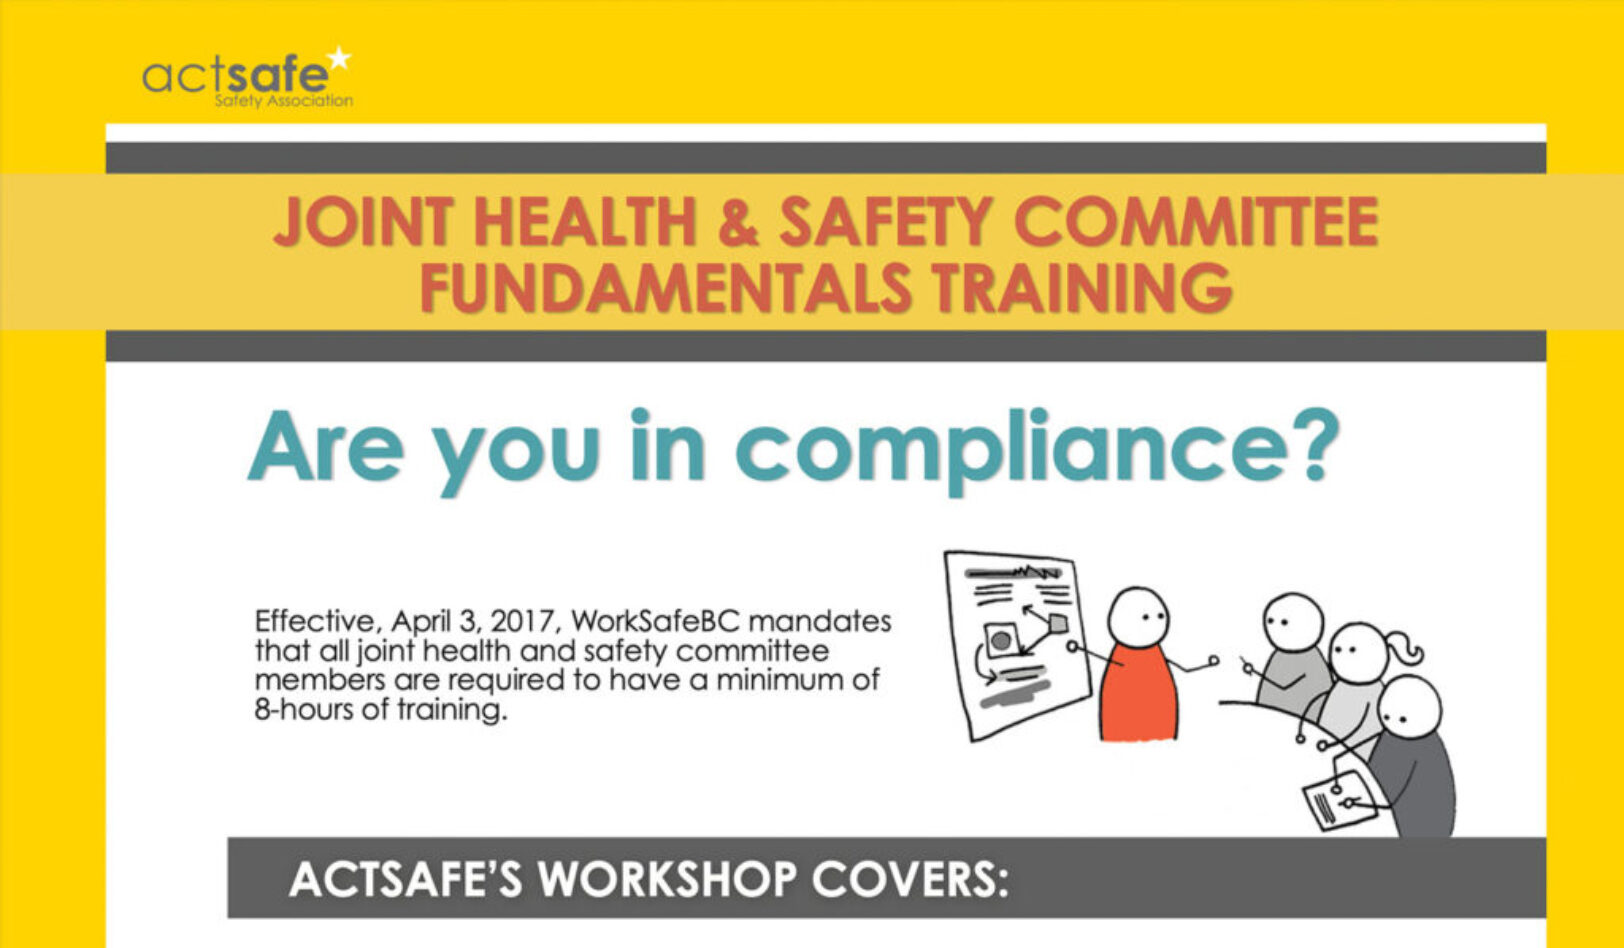 Joint Health & Safety Committee Fundamentals Group Training Fillable Form